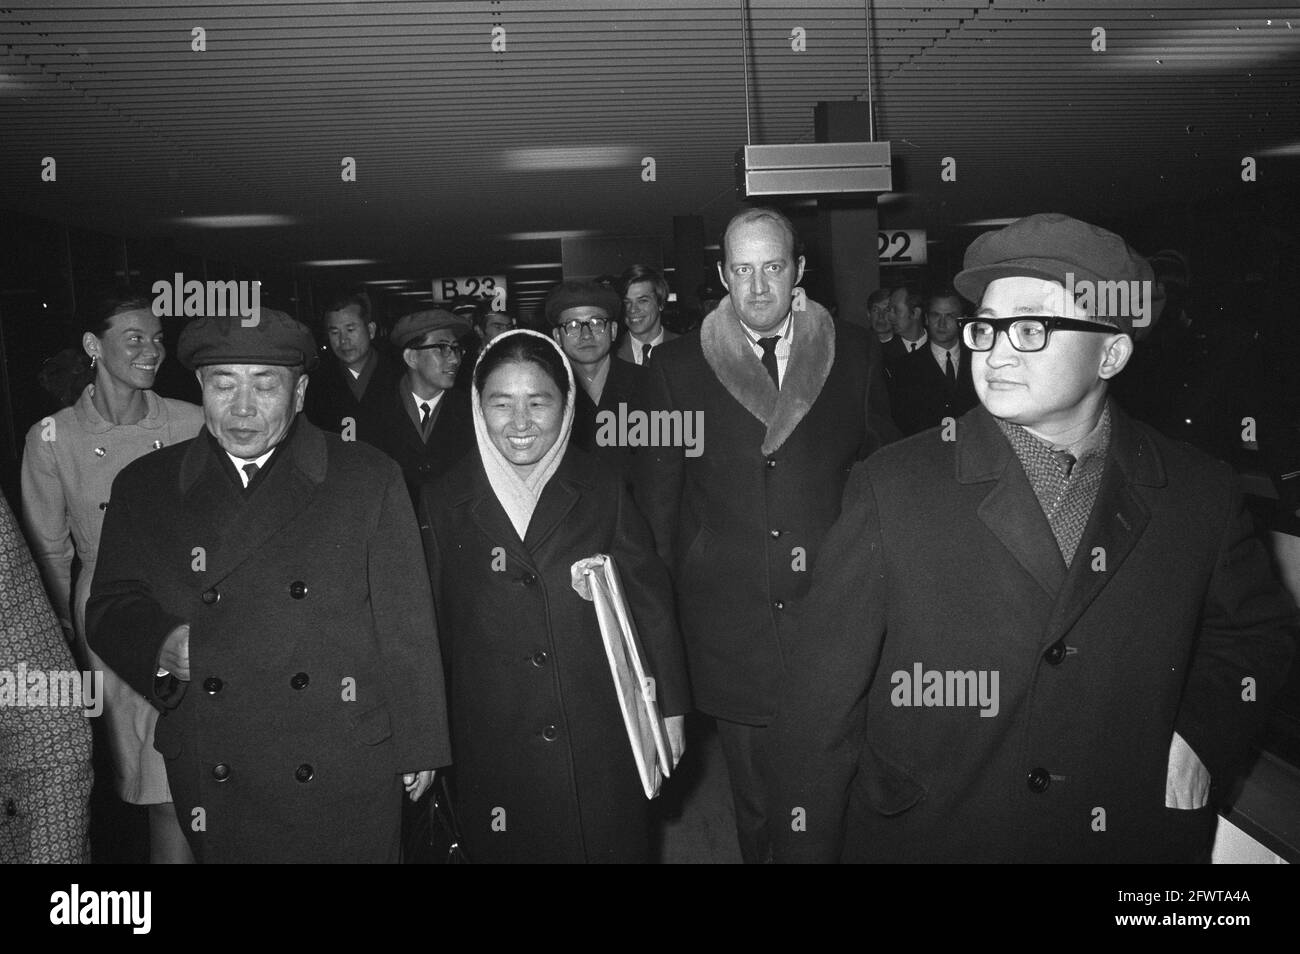 North Korean government delegation arrives at Schiphol Kim don Kyondel (leader), Ms Ri Souks, Haks (CPN) and interpreter, November 30, 1971, arrivals, delegations, leaders, interpreters, The Netherlands, 20th century press agency photo, news to remember, documentary, historic photography 1945-1990, visual stories, human history of the Twentieth Century, capturing moments in time Stock Photo